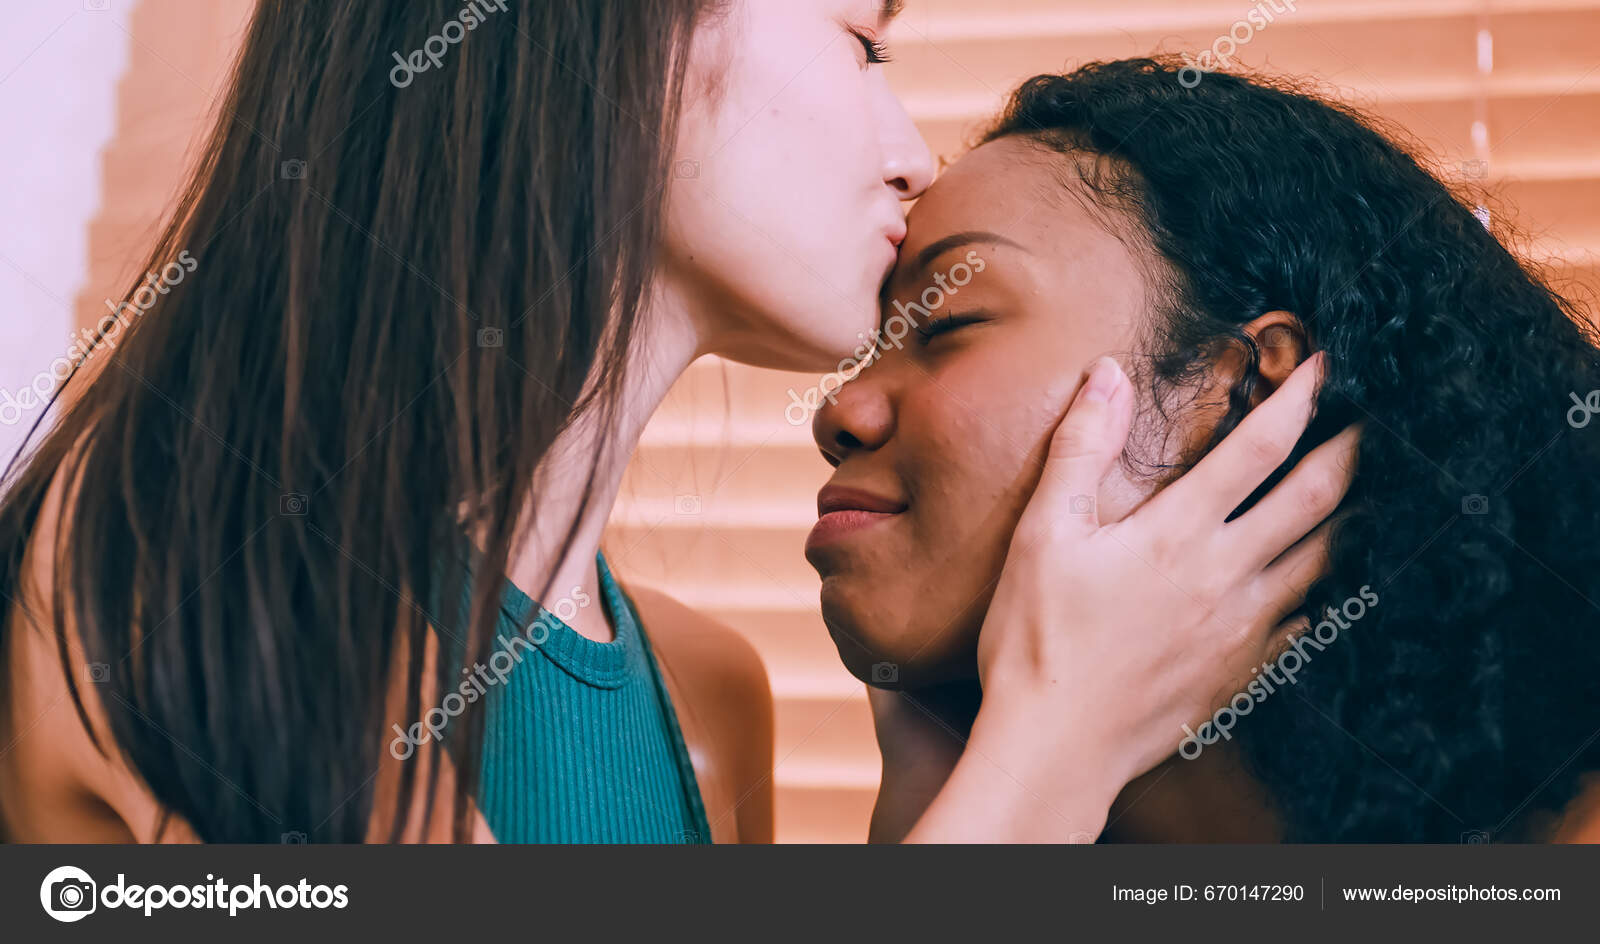 Young Woman Her Girlfriend Spending Time Together Home Lesbian Couple Stock Photo by ©ronnarong 670147290